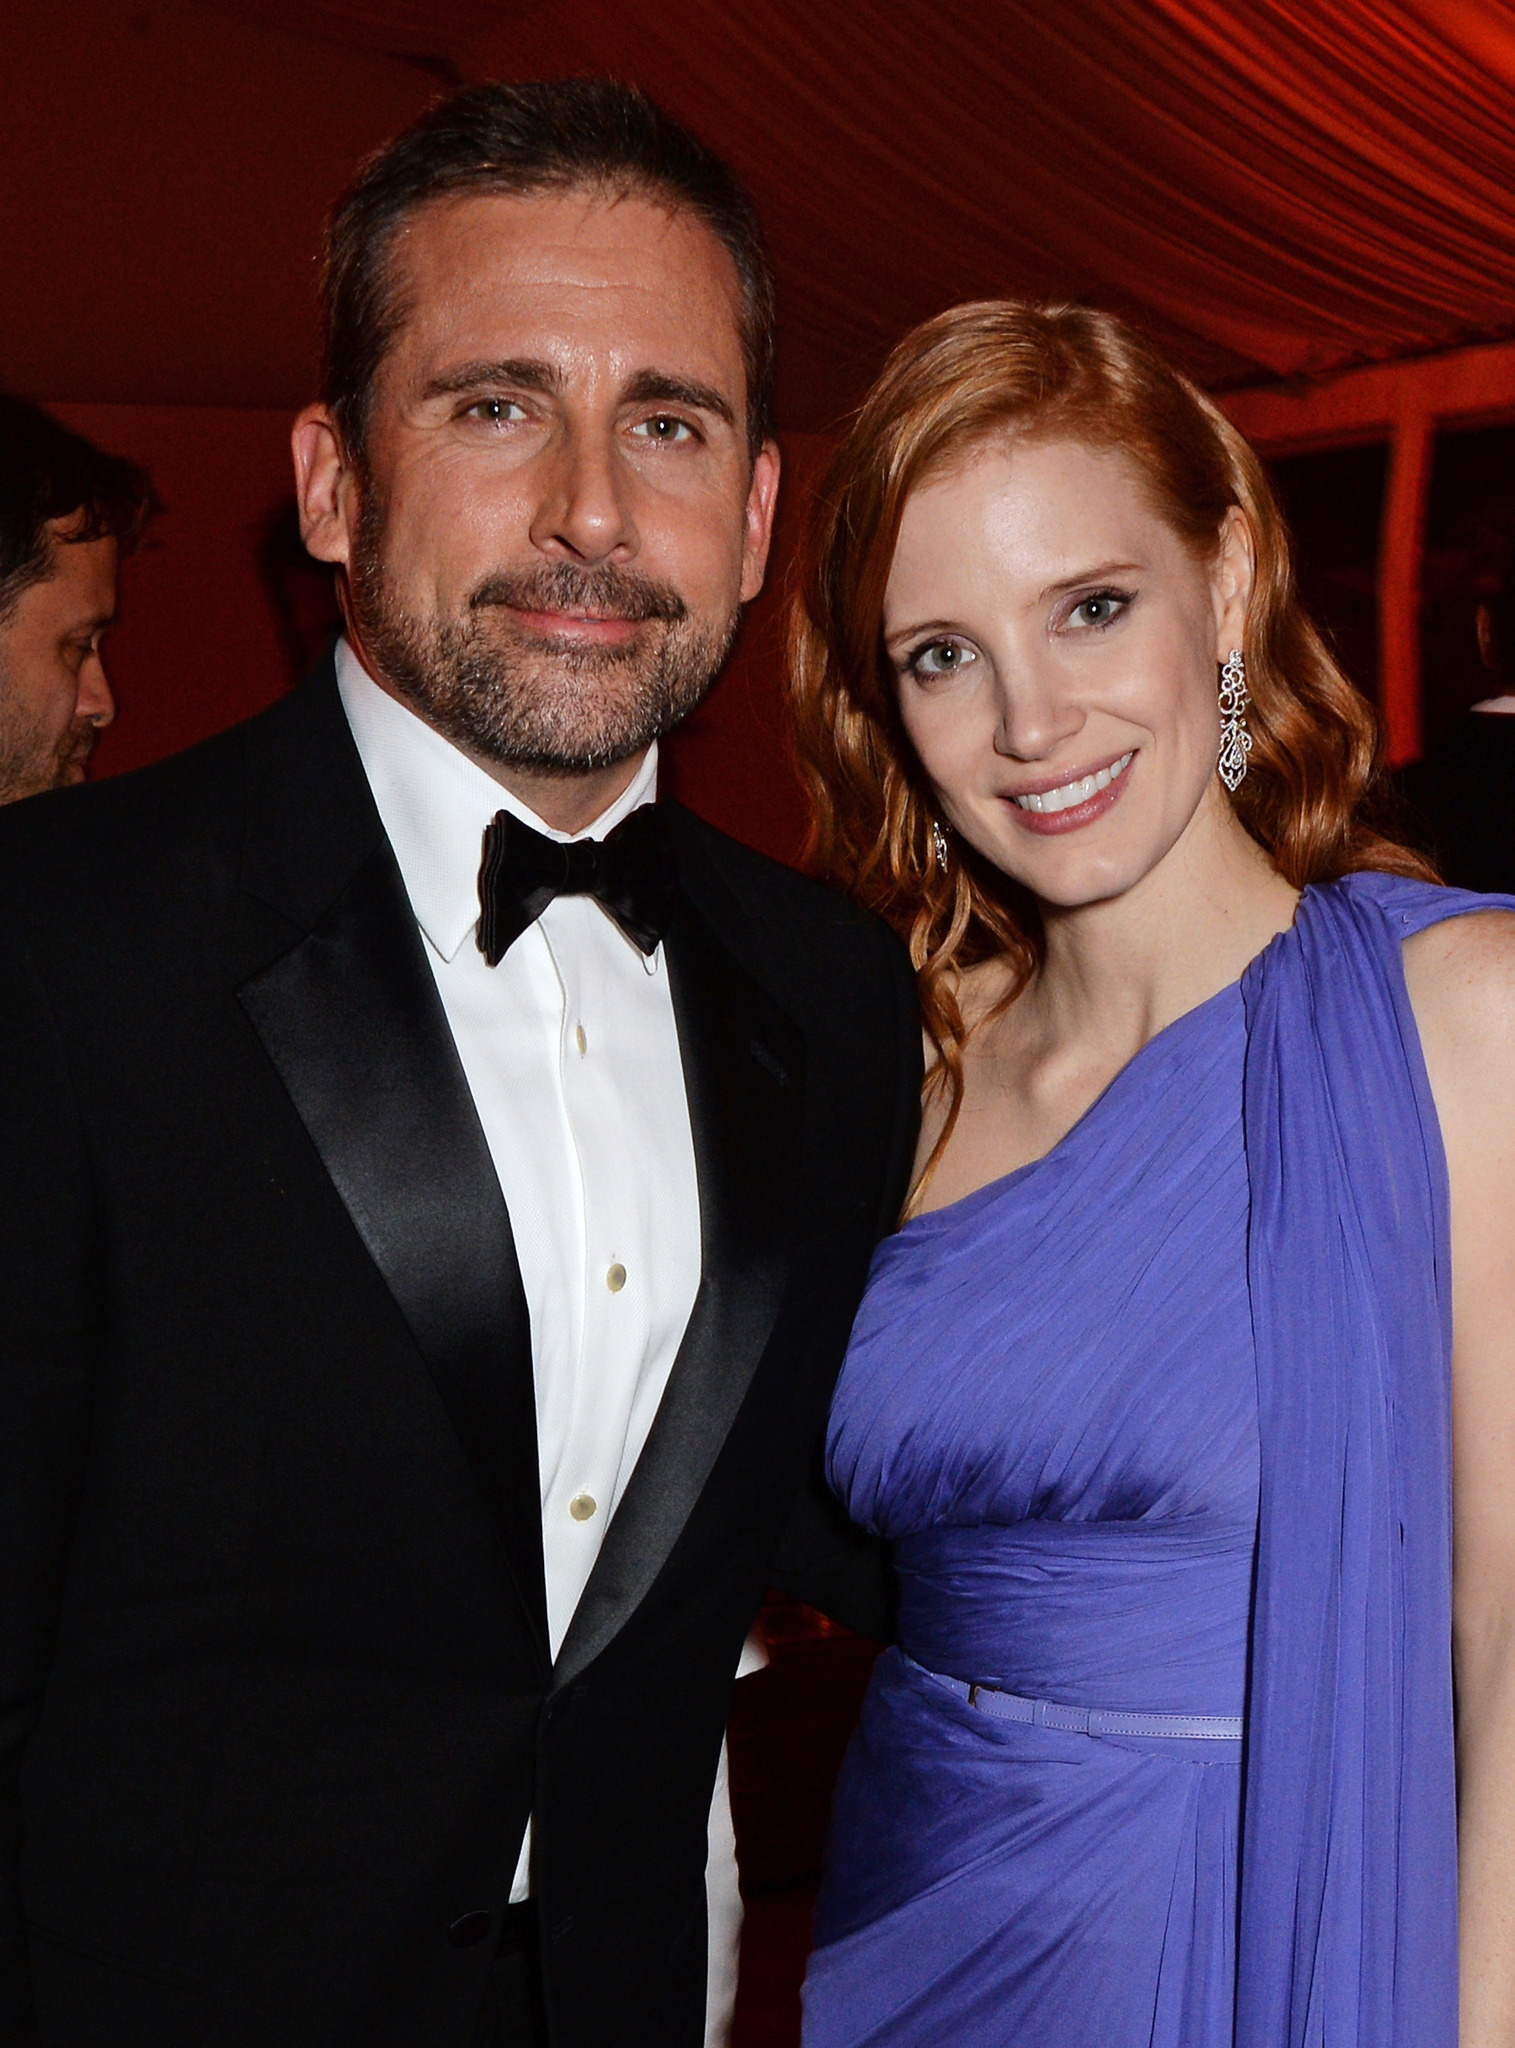 Steve Carell and Jessica Chastain at event of Foxcatcher (2014)